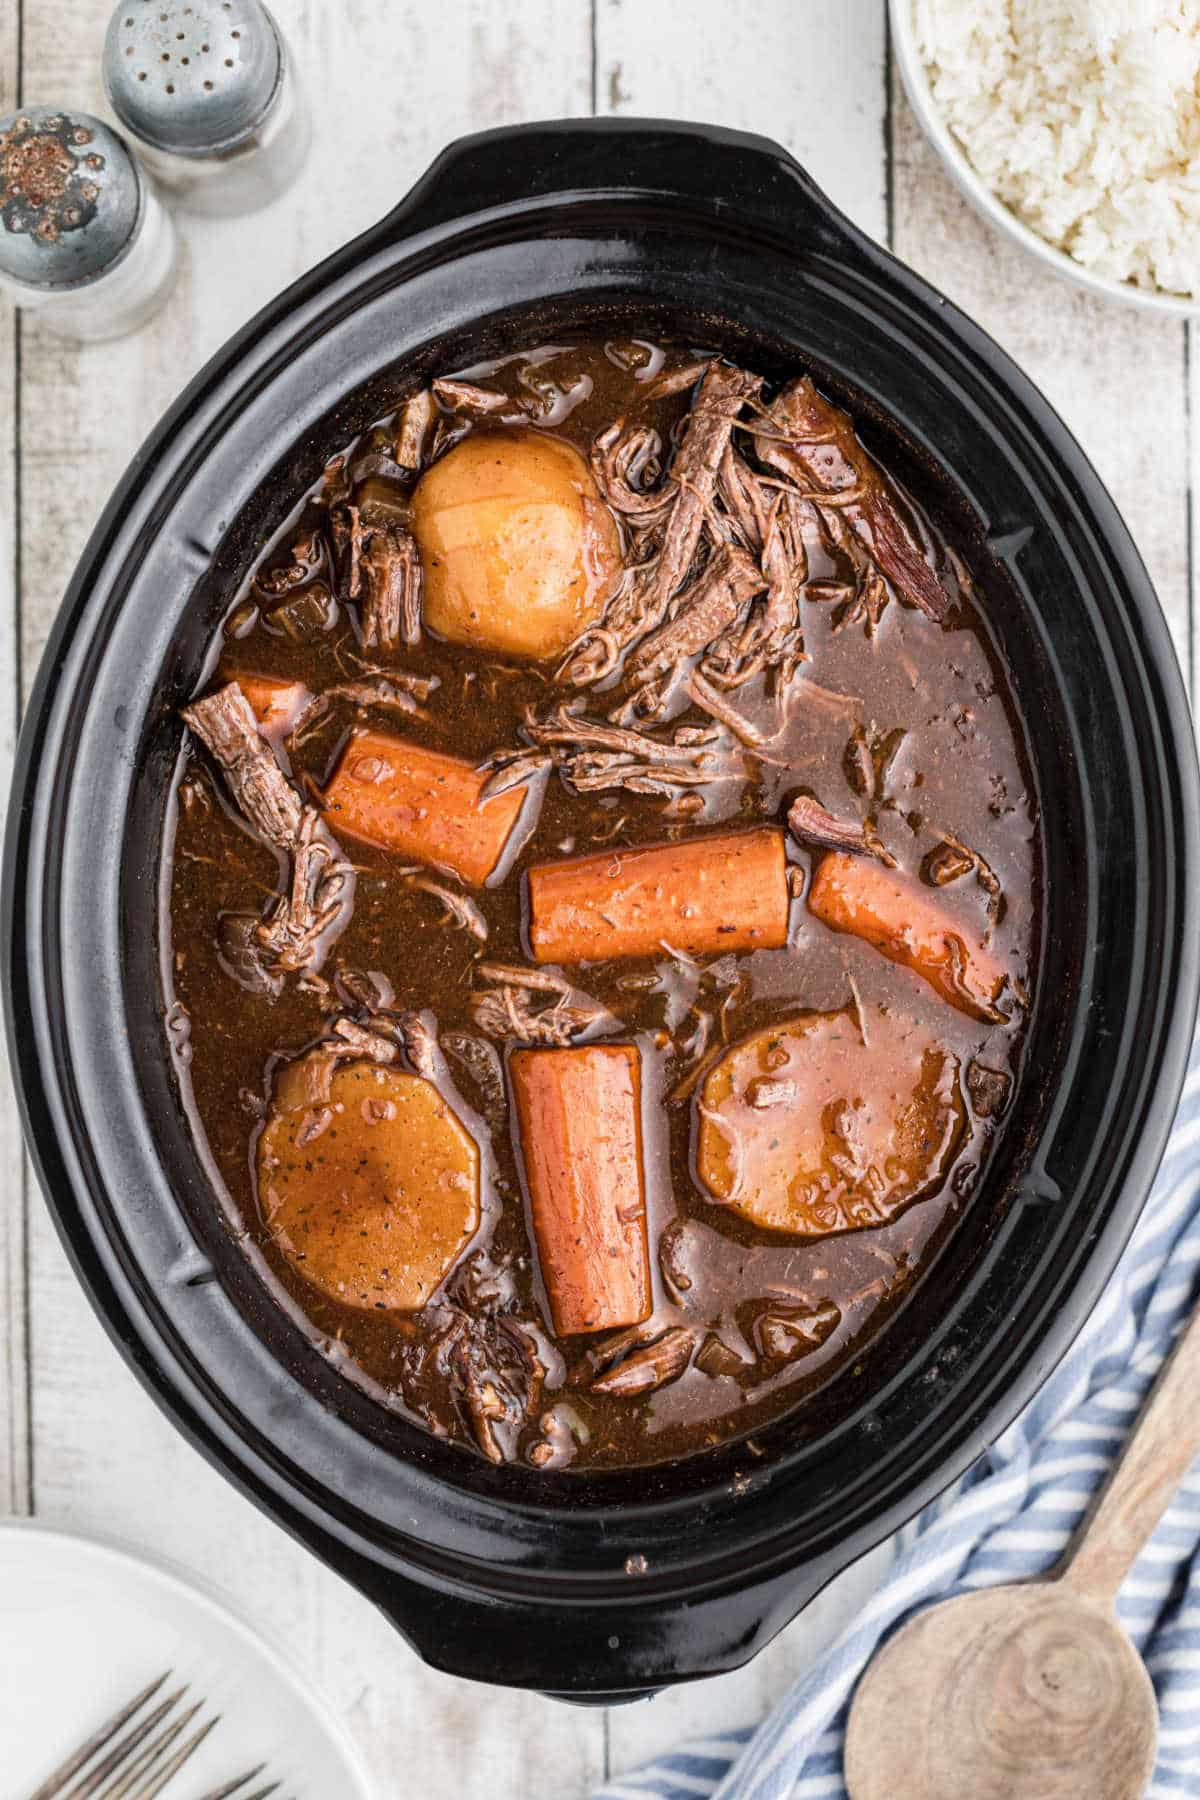 https://thecaglediaries.com/wp-content/uploads/2023/02/Slow-Cooker-Venison-Roast-with-Red-Wine-Hero-1.jpg